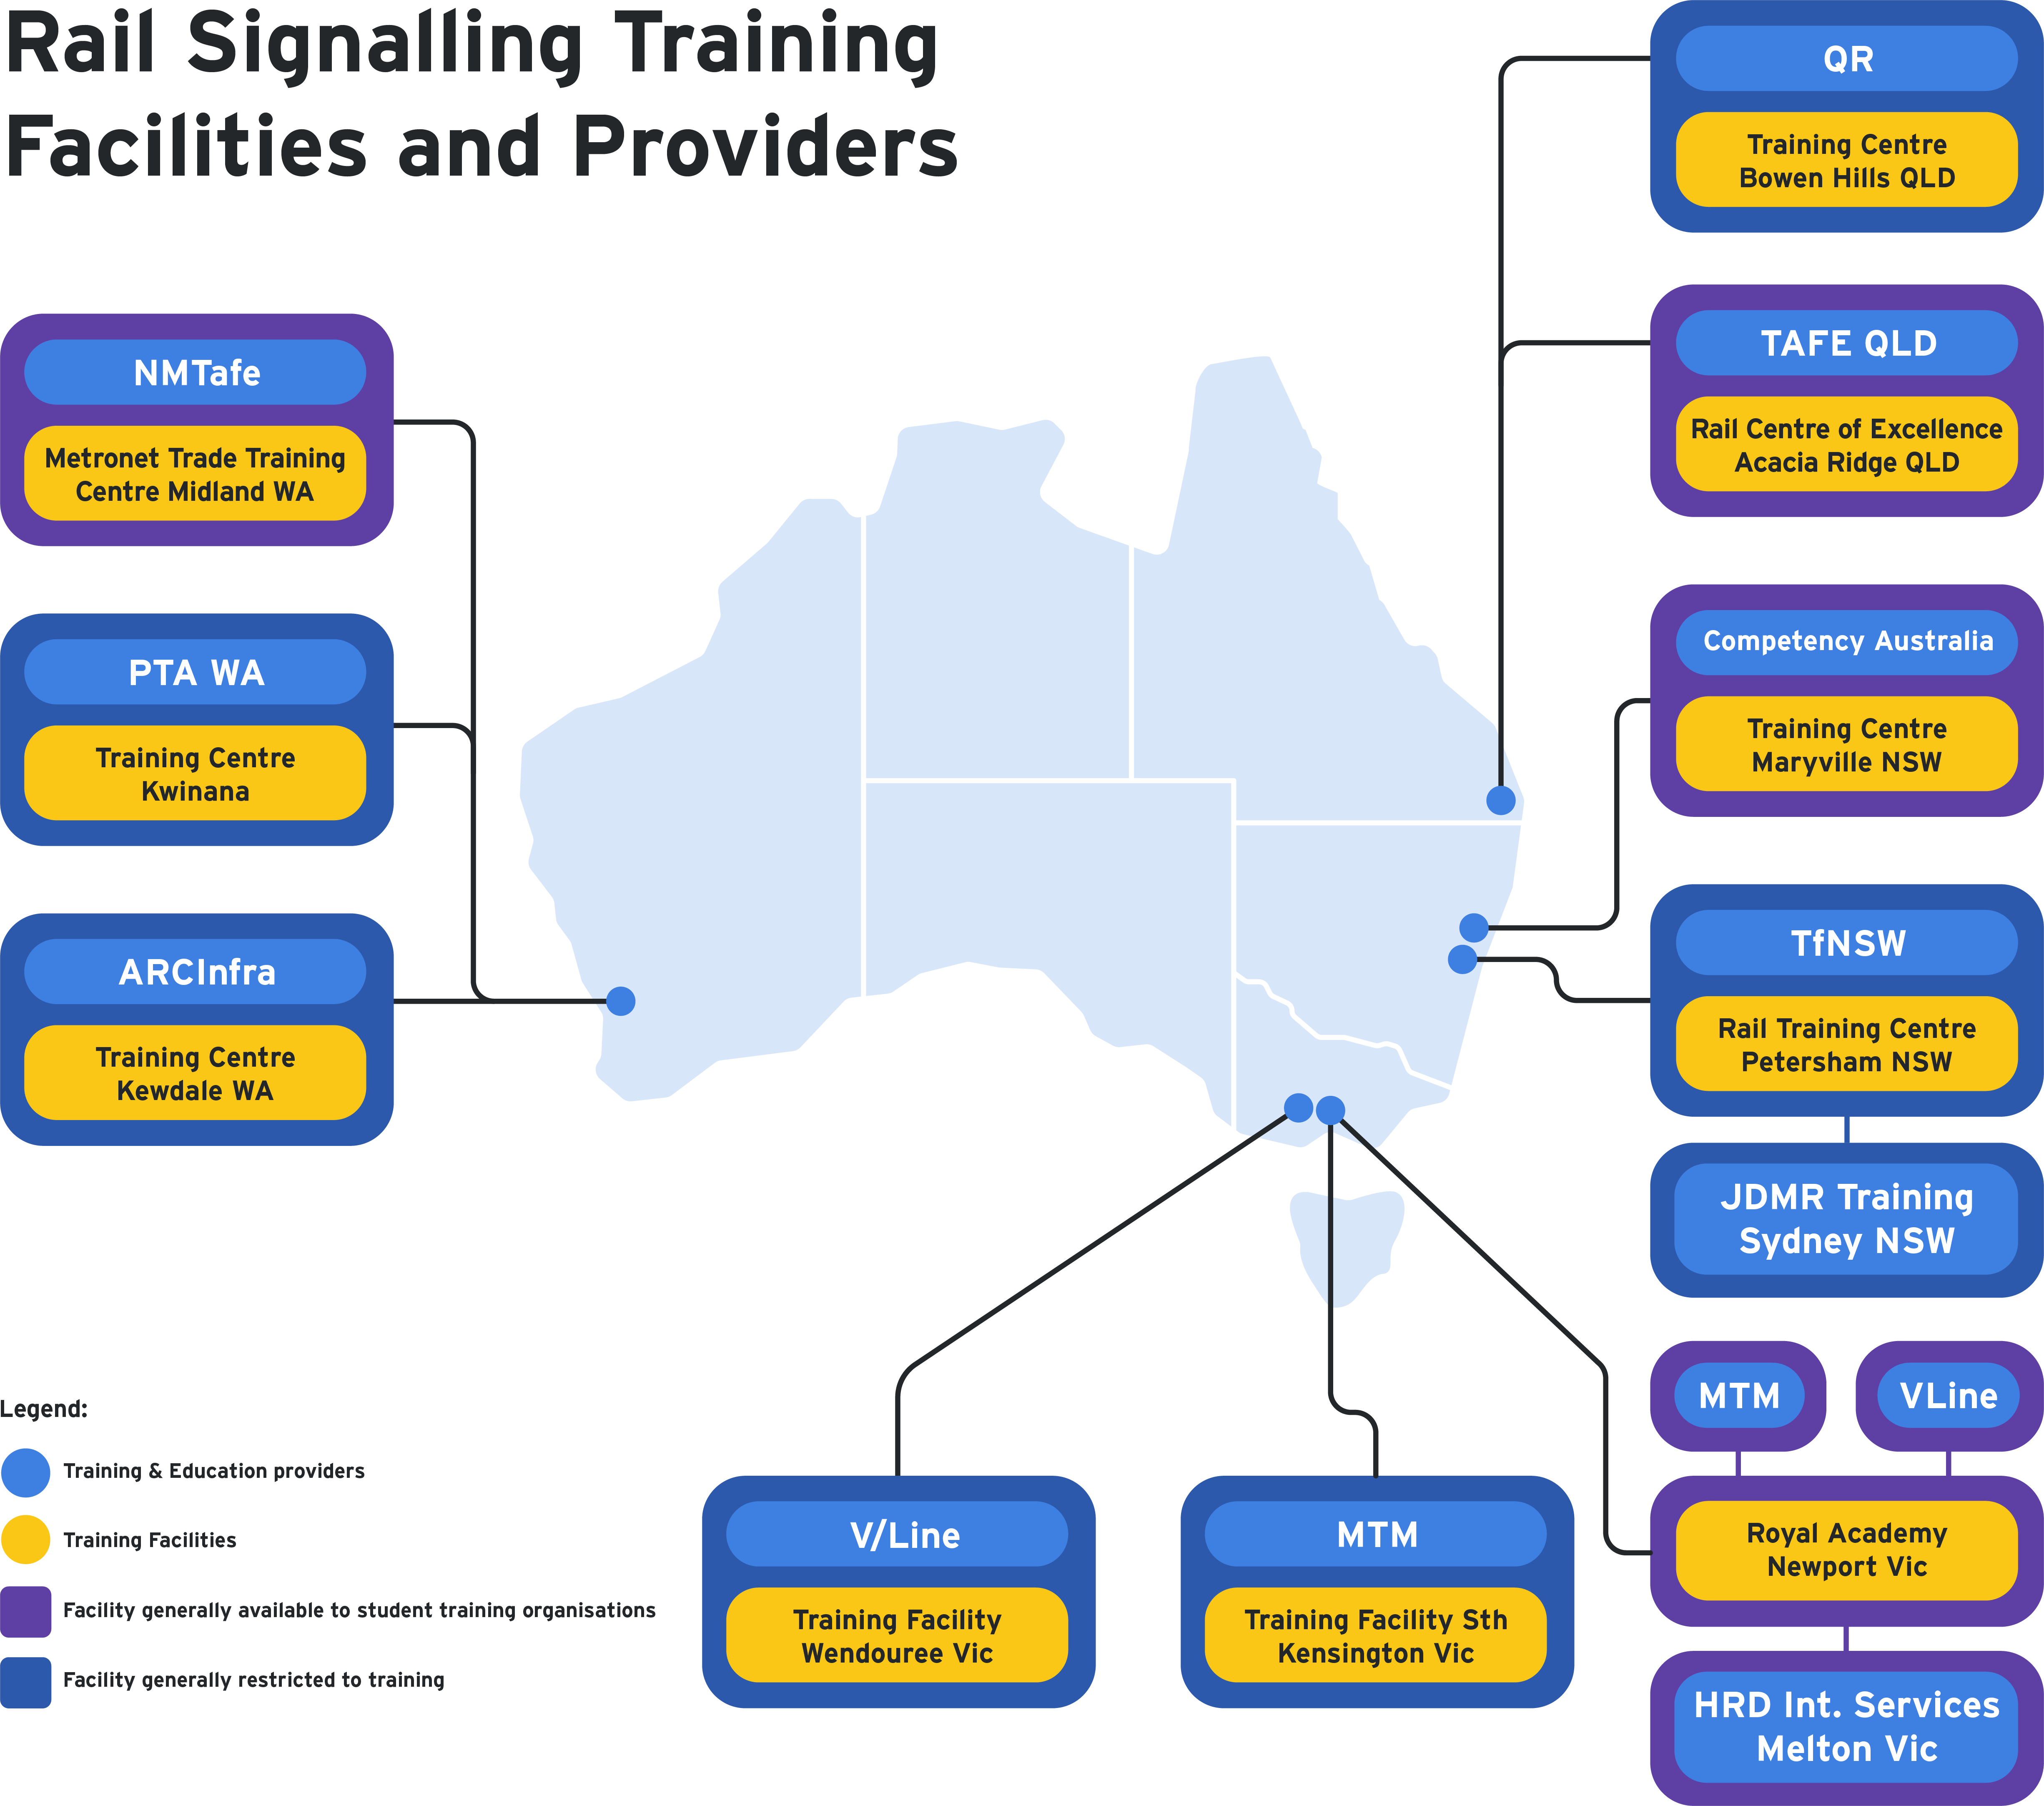 A map of Australia showing the location of rail signalling training facilities and providers